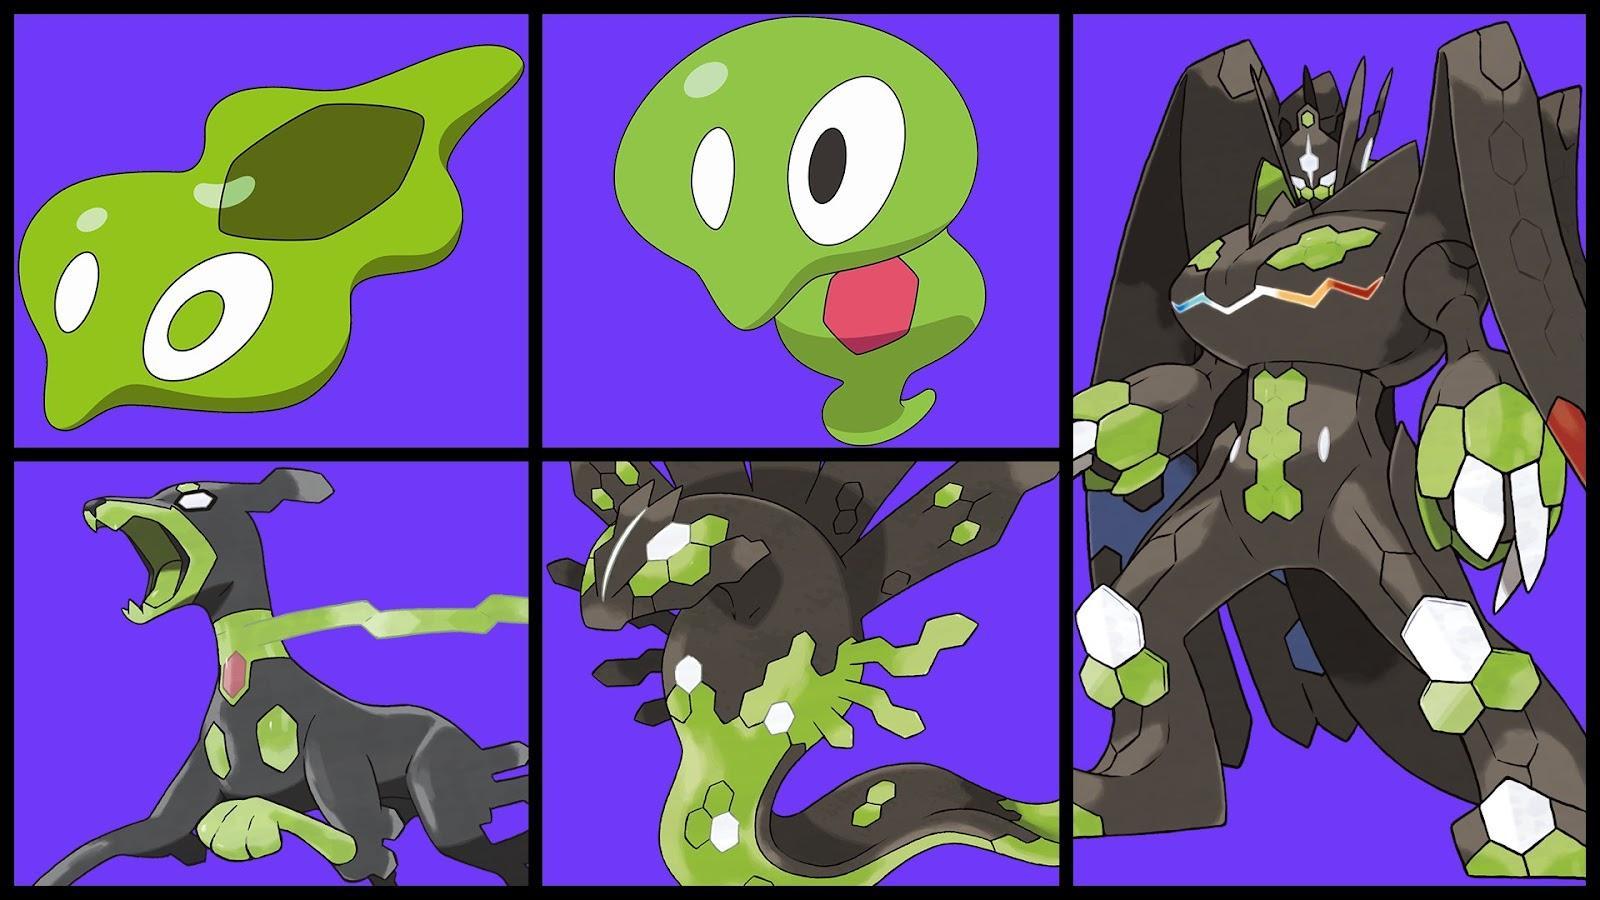 Pokemon Explained on Twitter: "Which is your favourite Zygarde form?  #Pokemon https://t.co/OsDyPXdHrG" / Twitter